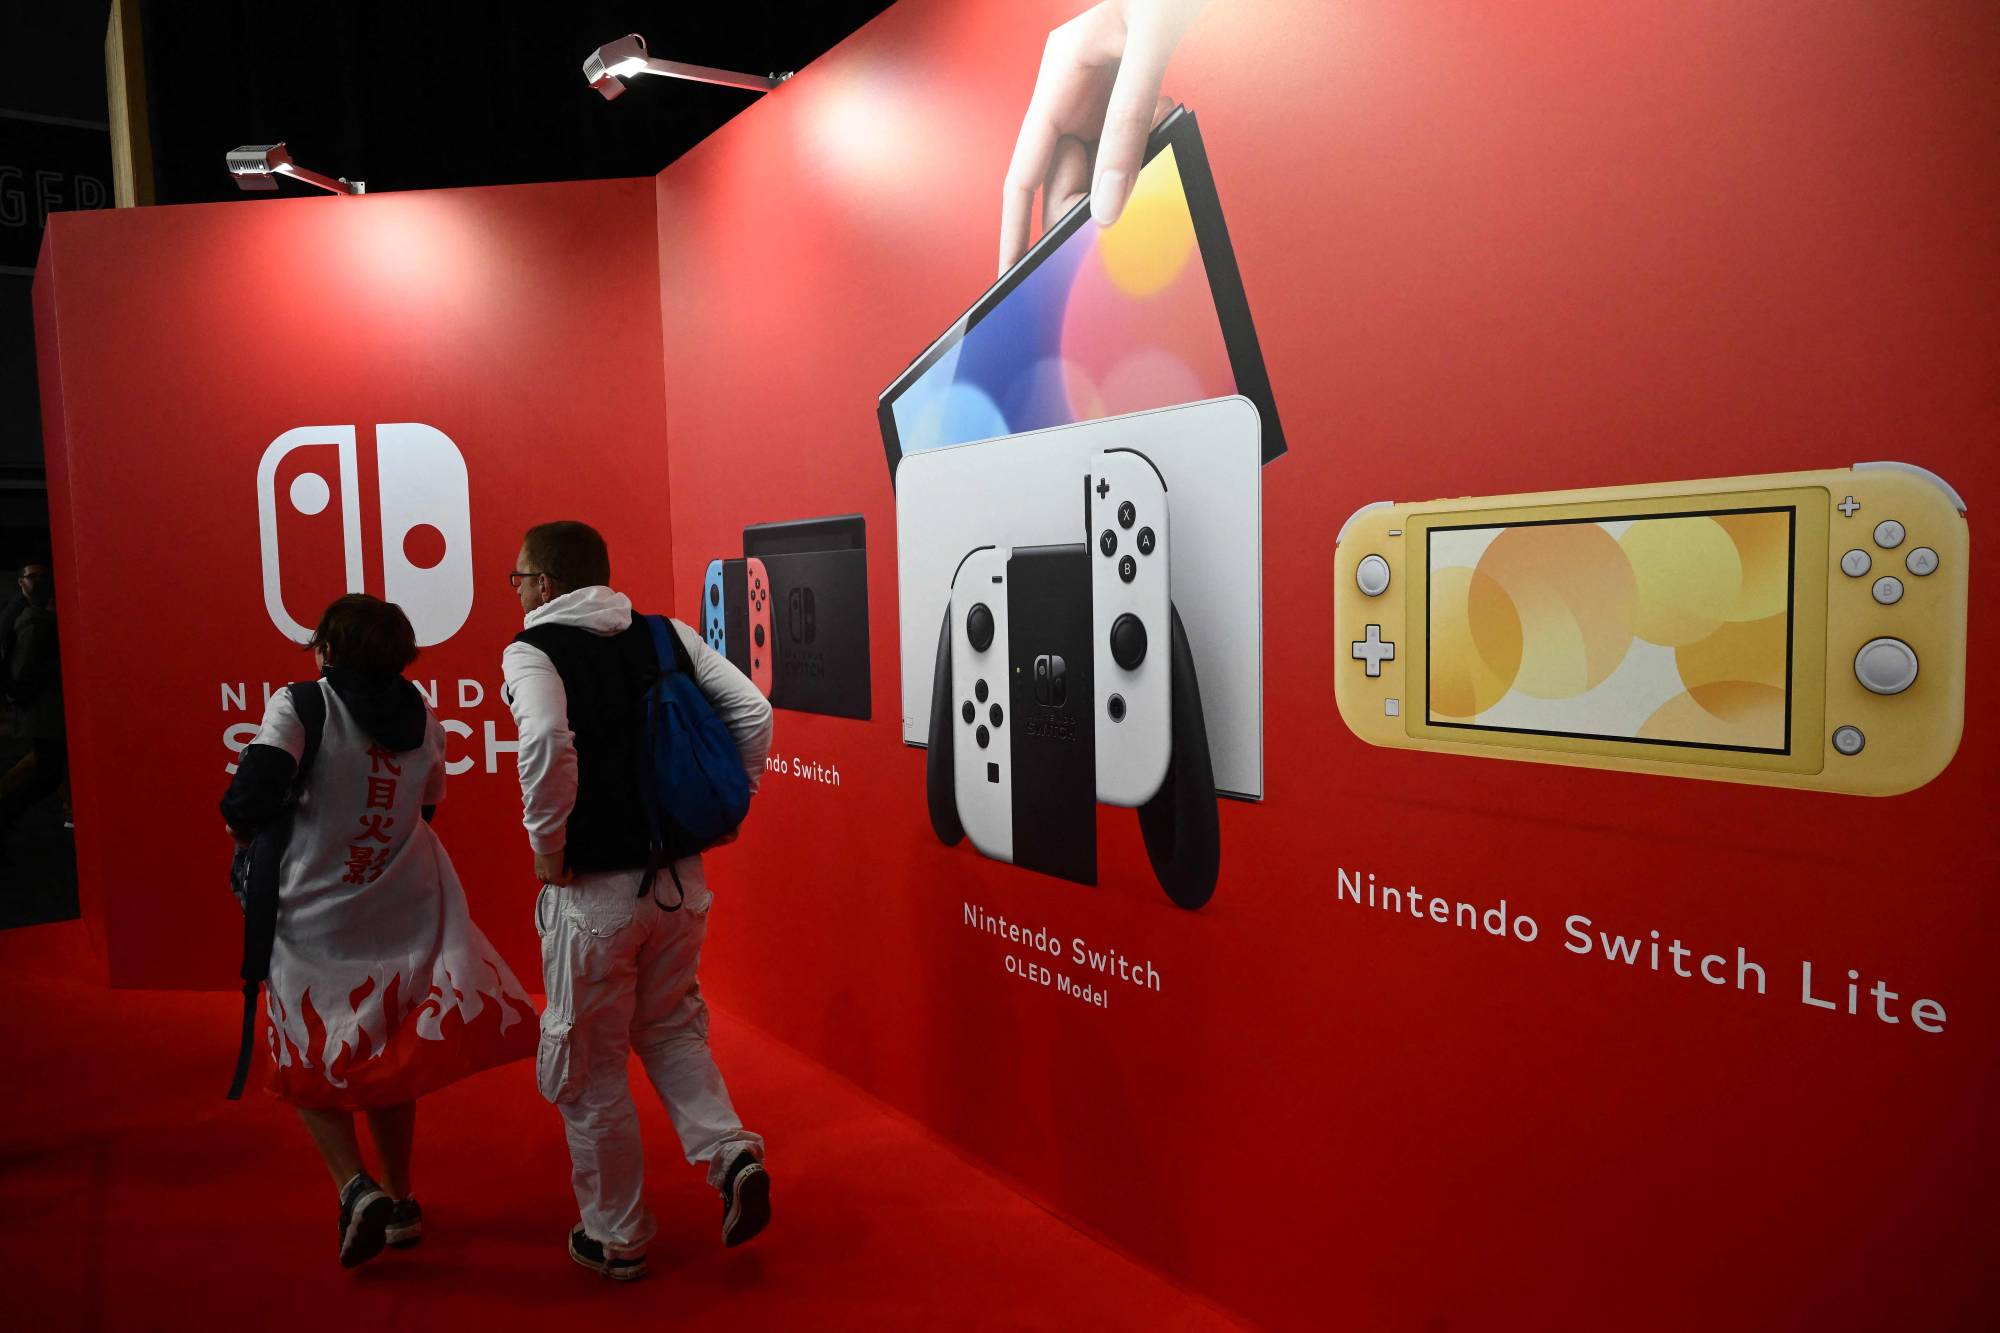 Nintendo's new Pokemon release for the Switch console marked its biggest initial sales globally. | AFP-JIJI